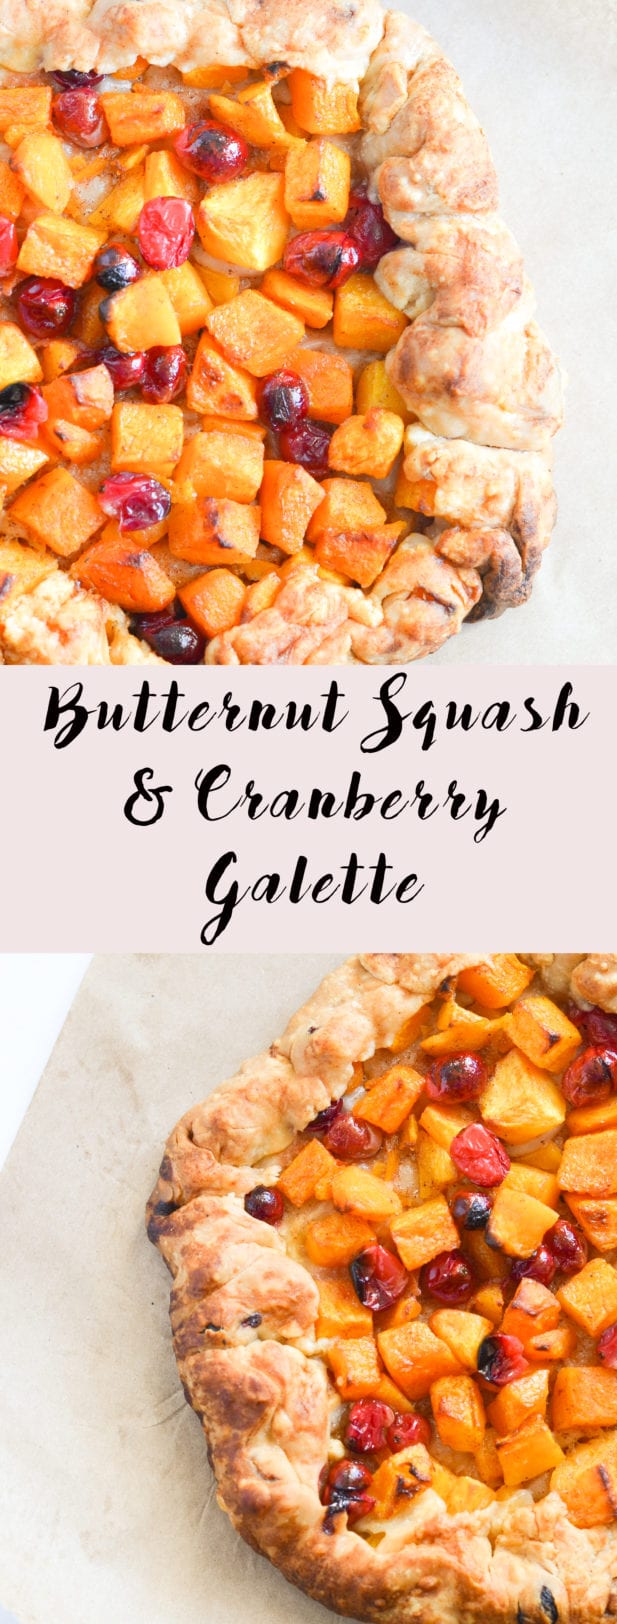 Butternut Squash and Cranberry Galette